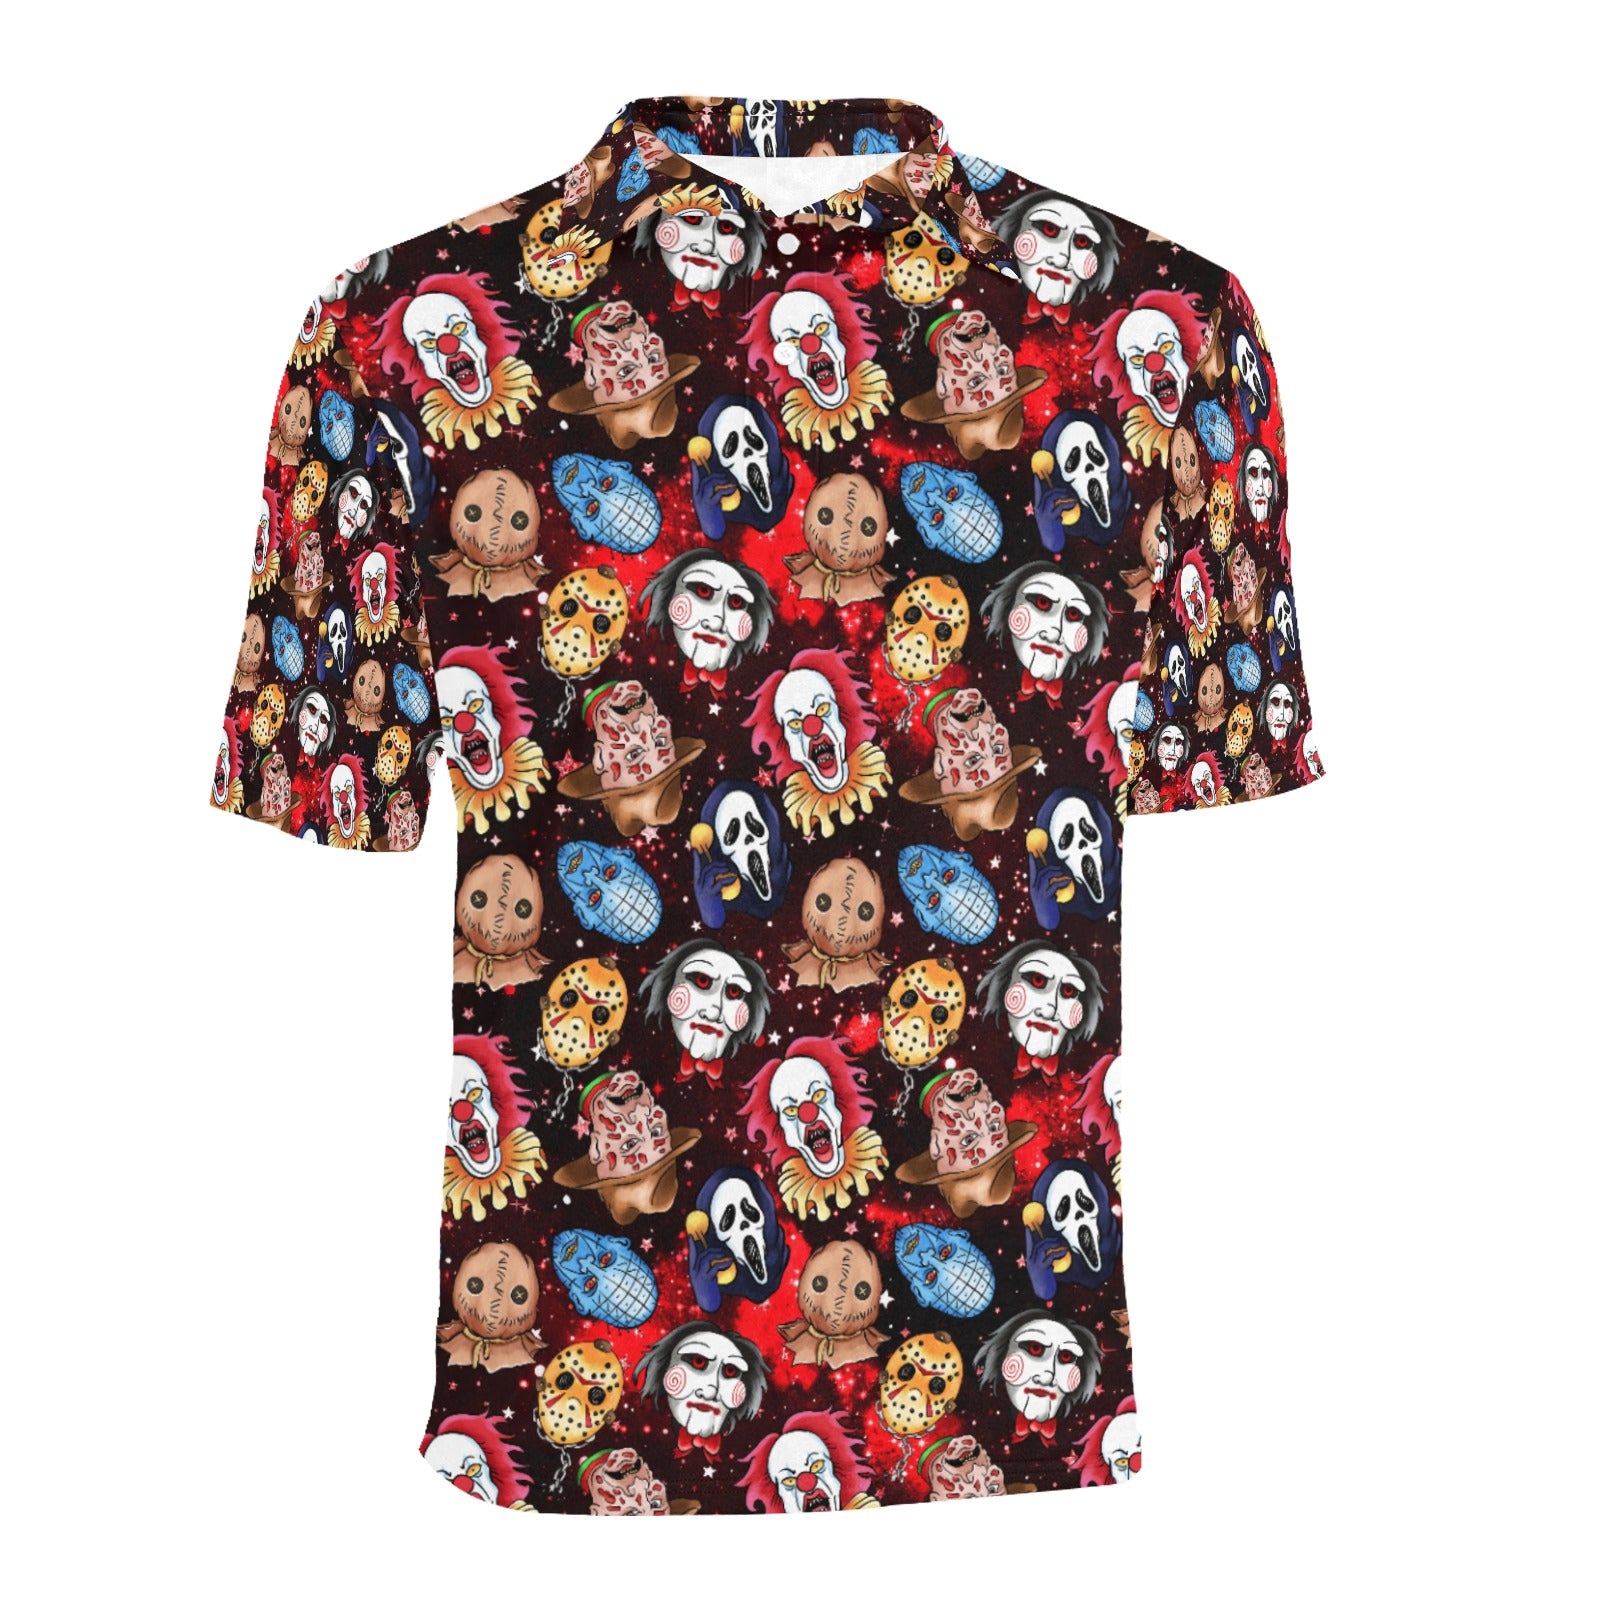 Faces Of Horror Polo Shirt Inkedjoy